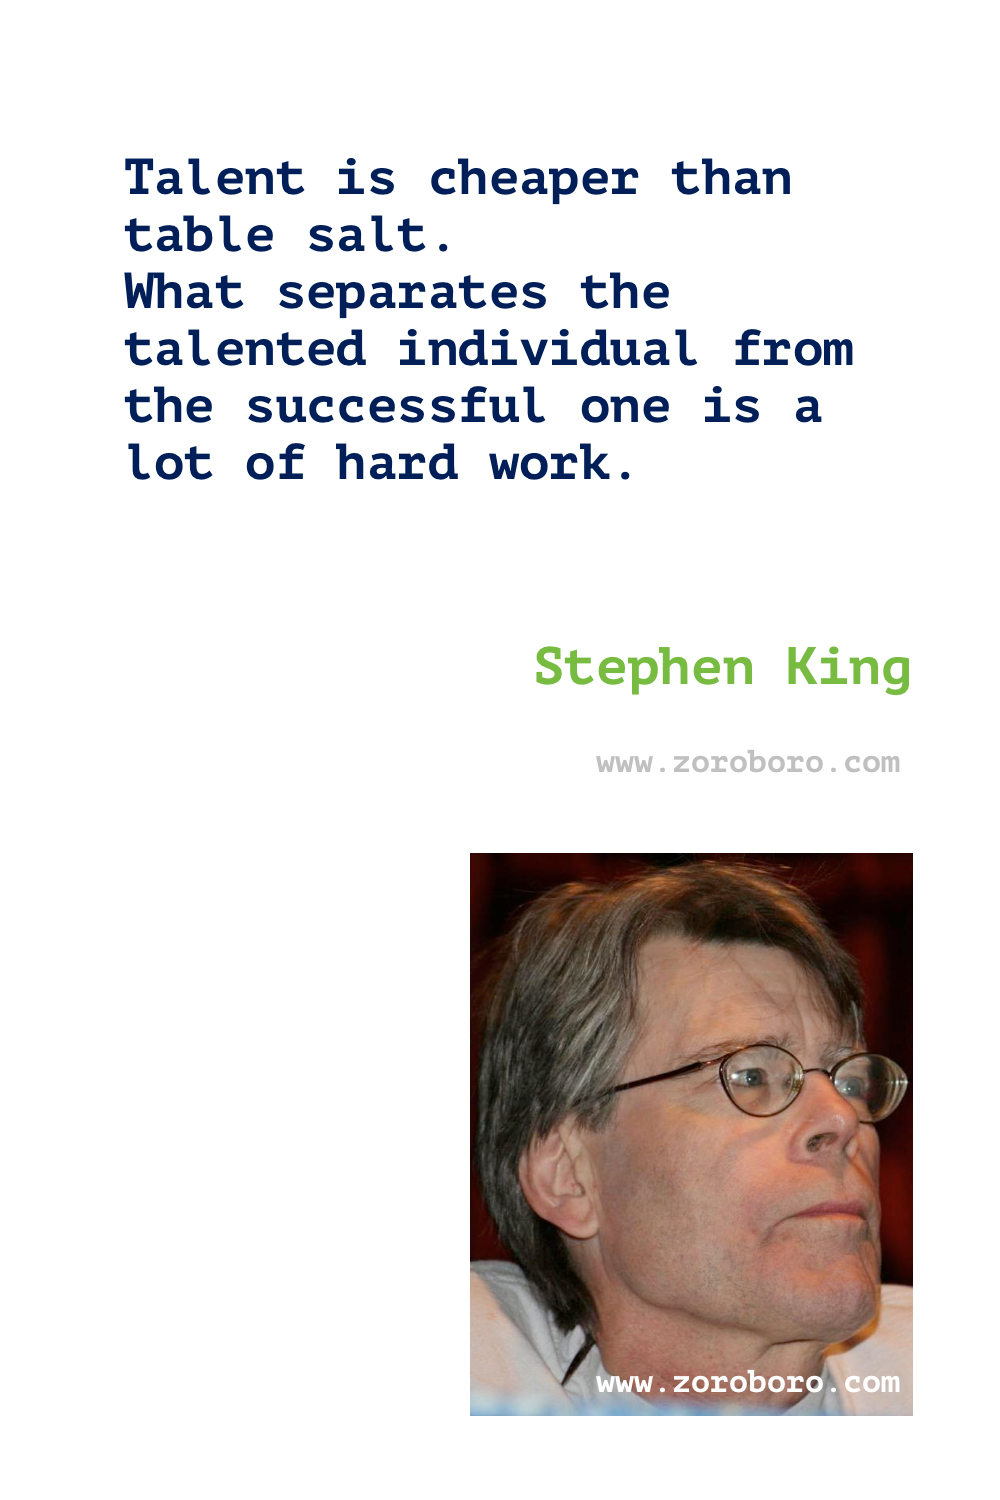 Stephen King Quotes. Stephen King Books Novels Quotes. Stephen King Movies. Stephen King Writing. Stephen King Inspirational Quotes    The Stand, The Shawshank Redemption, Pet Sematary 1989, Carrie 1976, The Green Mile, The Dark Tower & On Writing: A Memoir of the Craft Quotes